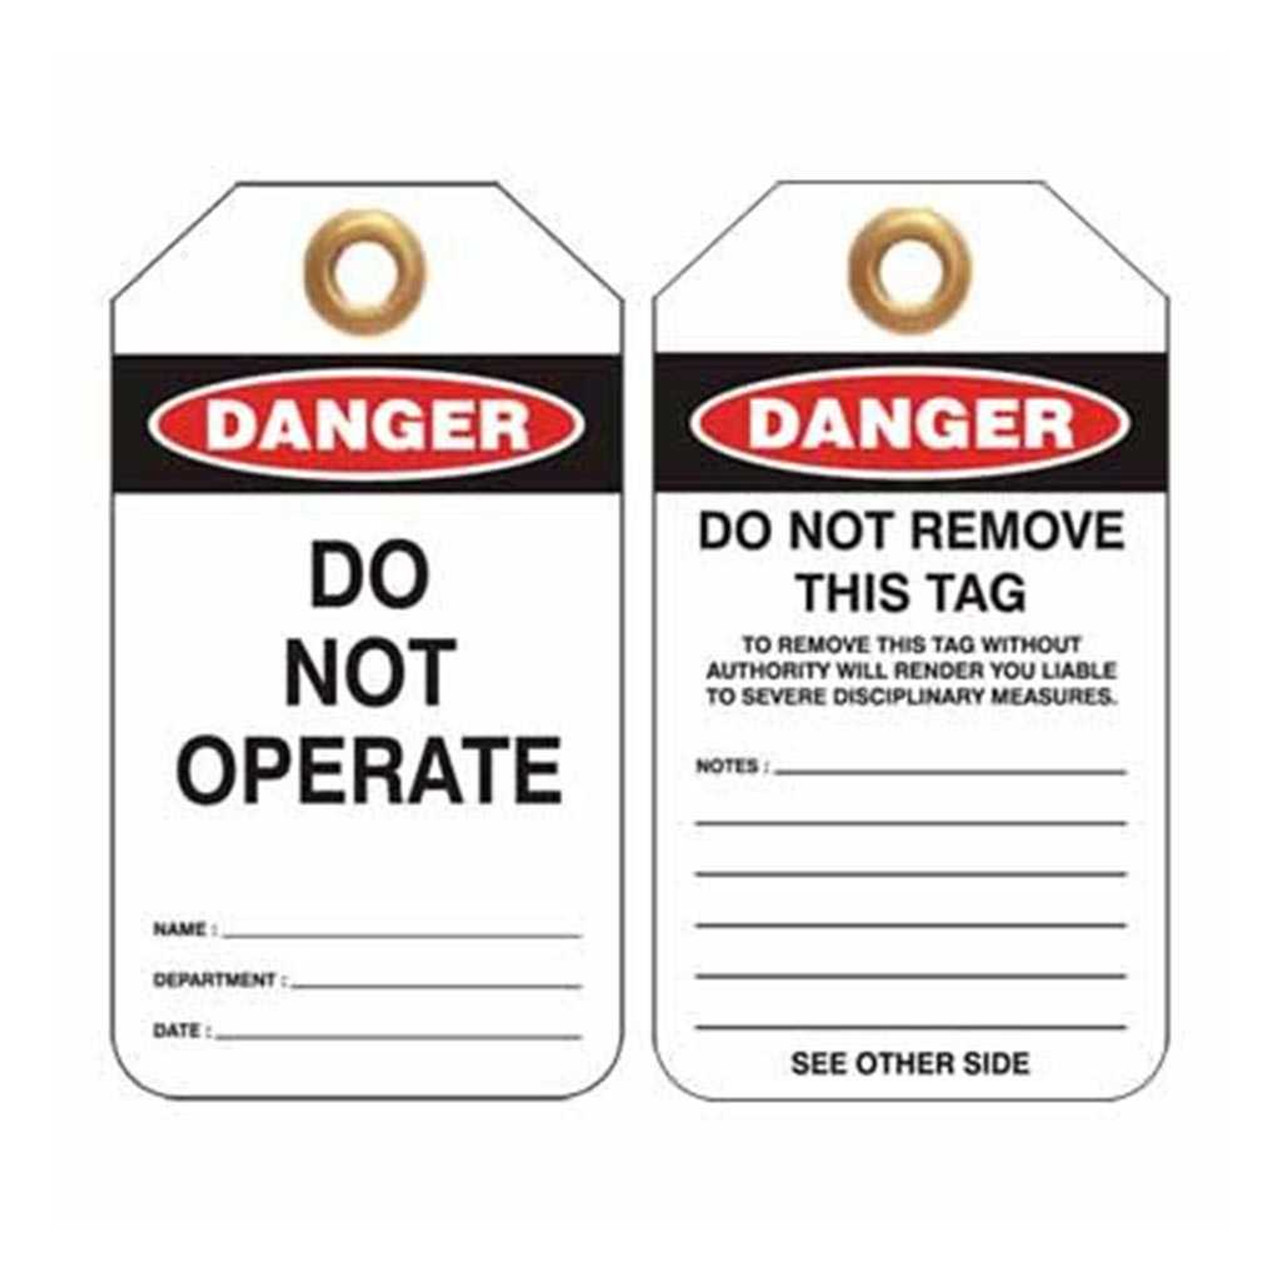 What is Important about LOTO Tags - Lockout Tagout Tags